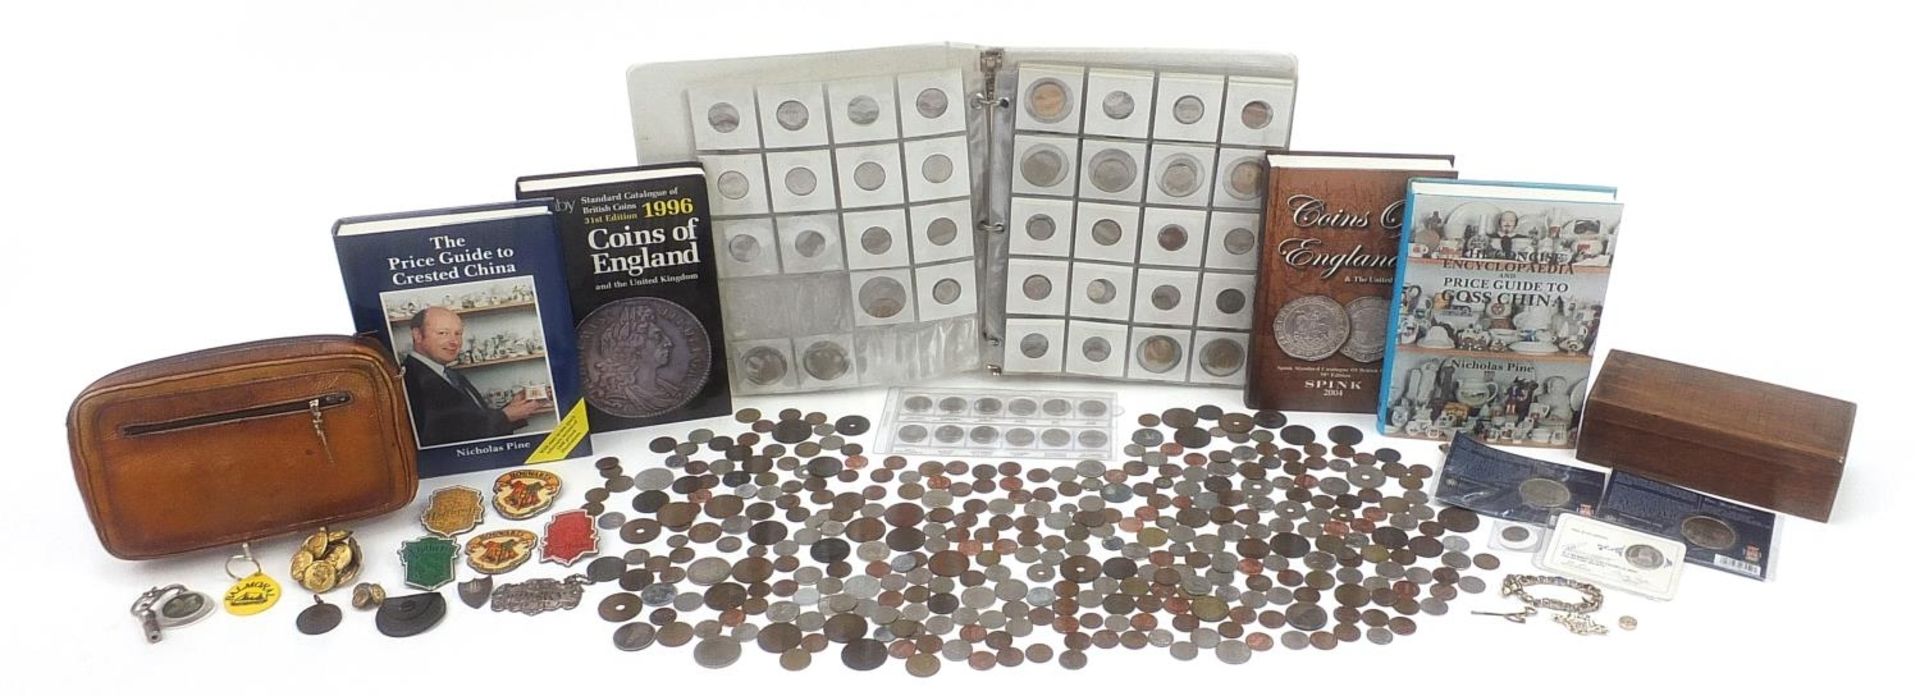 Coinage and reference books including two Queen's Diamond Jubilee five pound coins